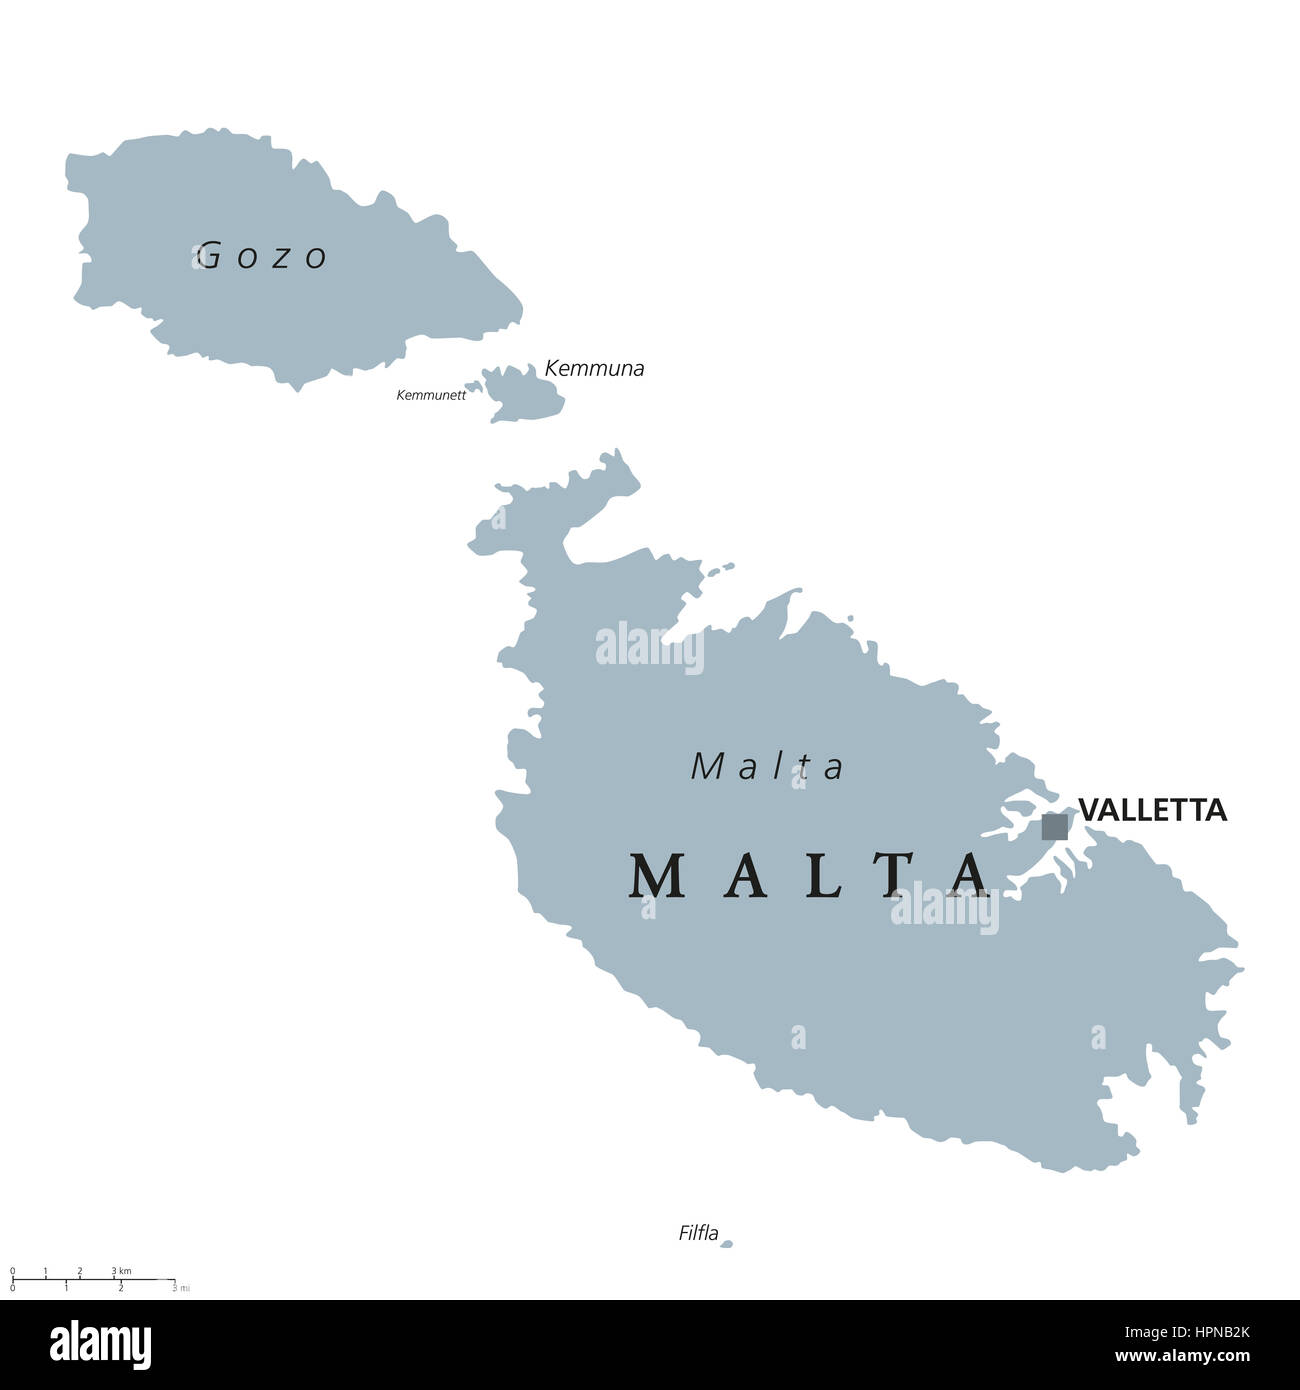 Malta political map with capital Valletta. Republic and Southern Europe island country consisting of an archipelago in the Mediterranean Sea. Stock Photo